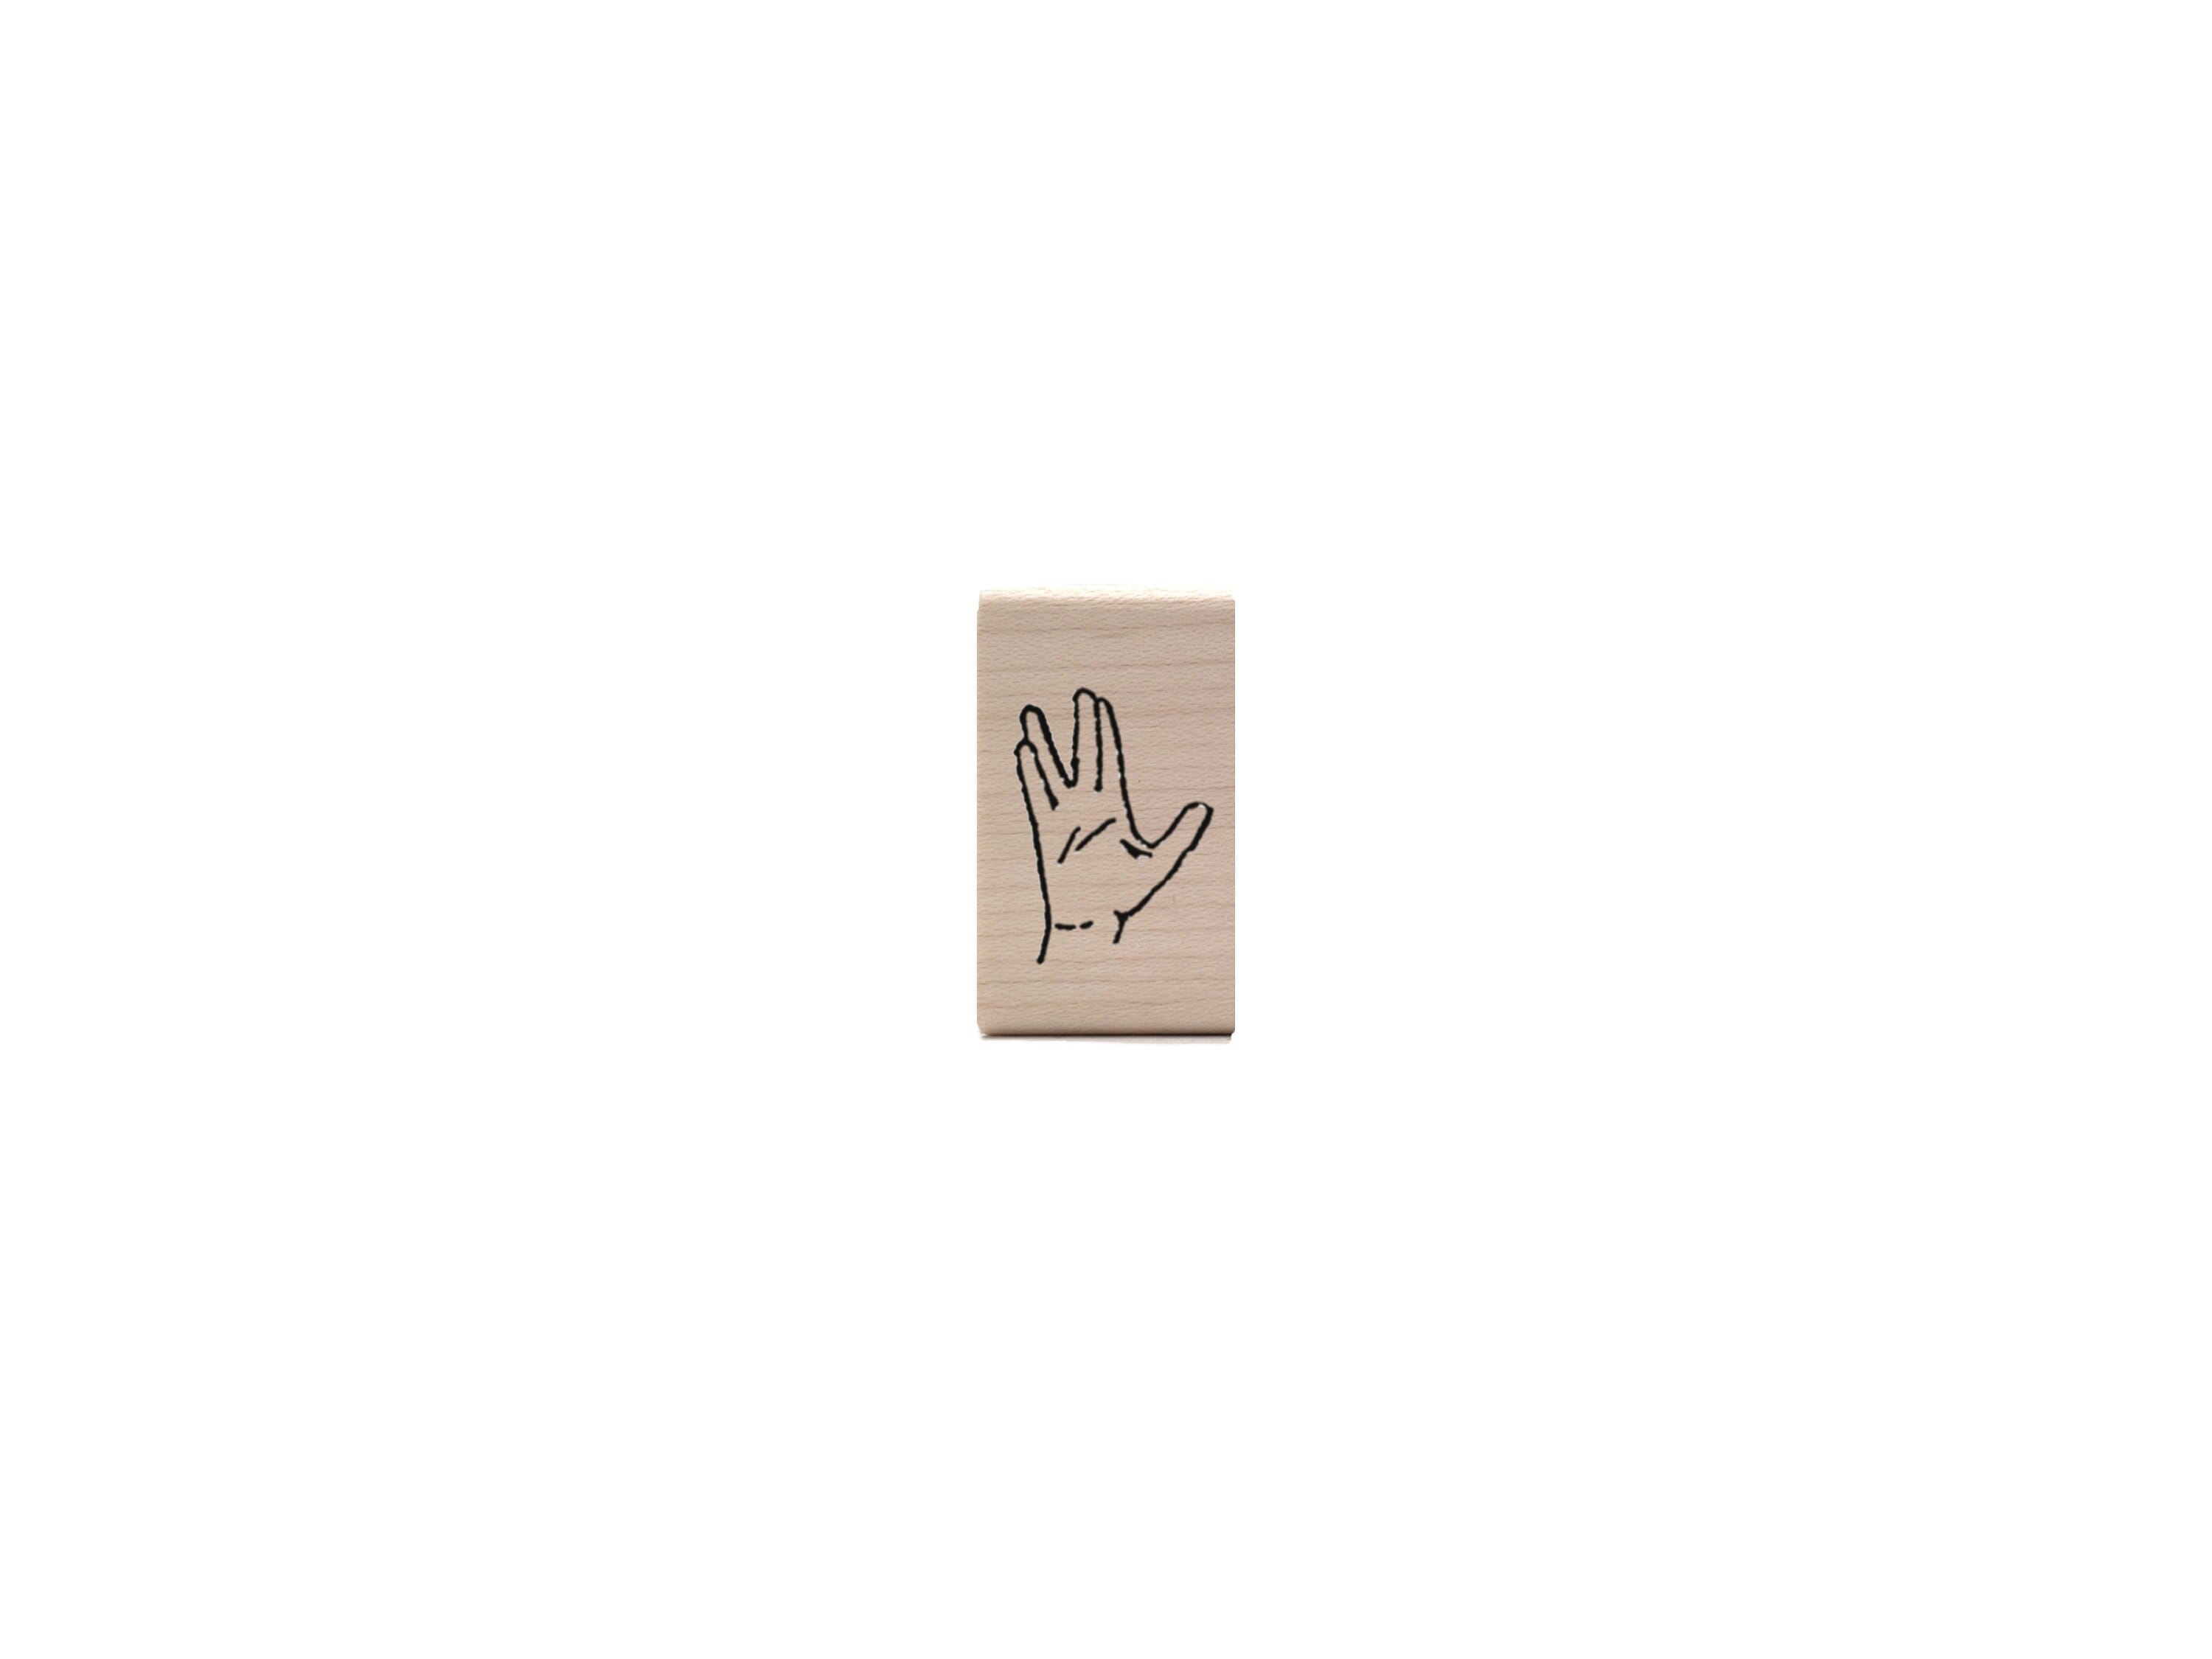 Spock Vulcan Salute Rubber Stamp - Long and Prosper Hand Stamp - Trek Party